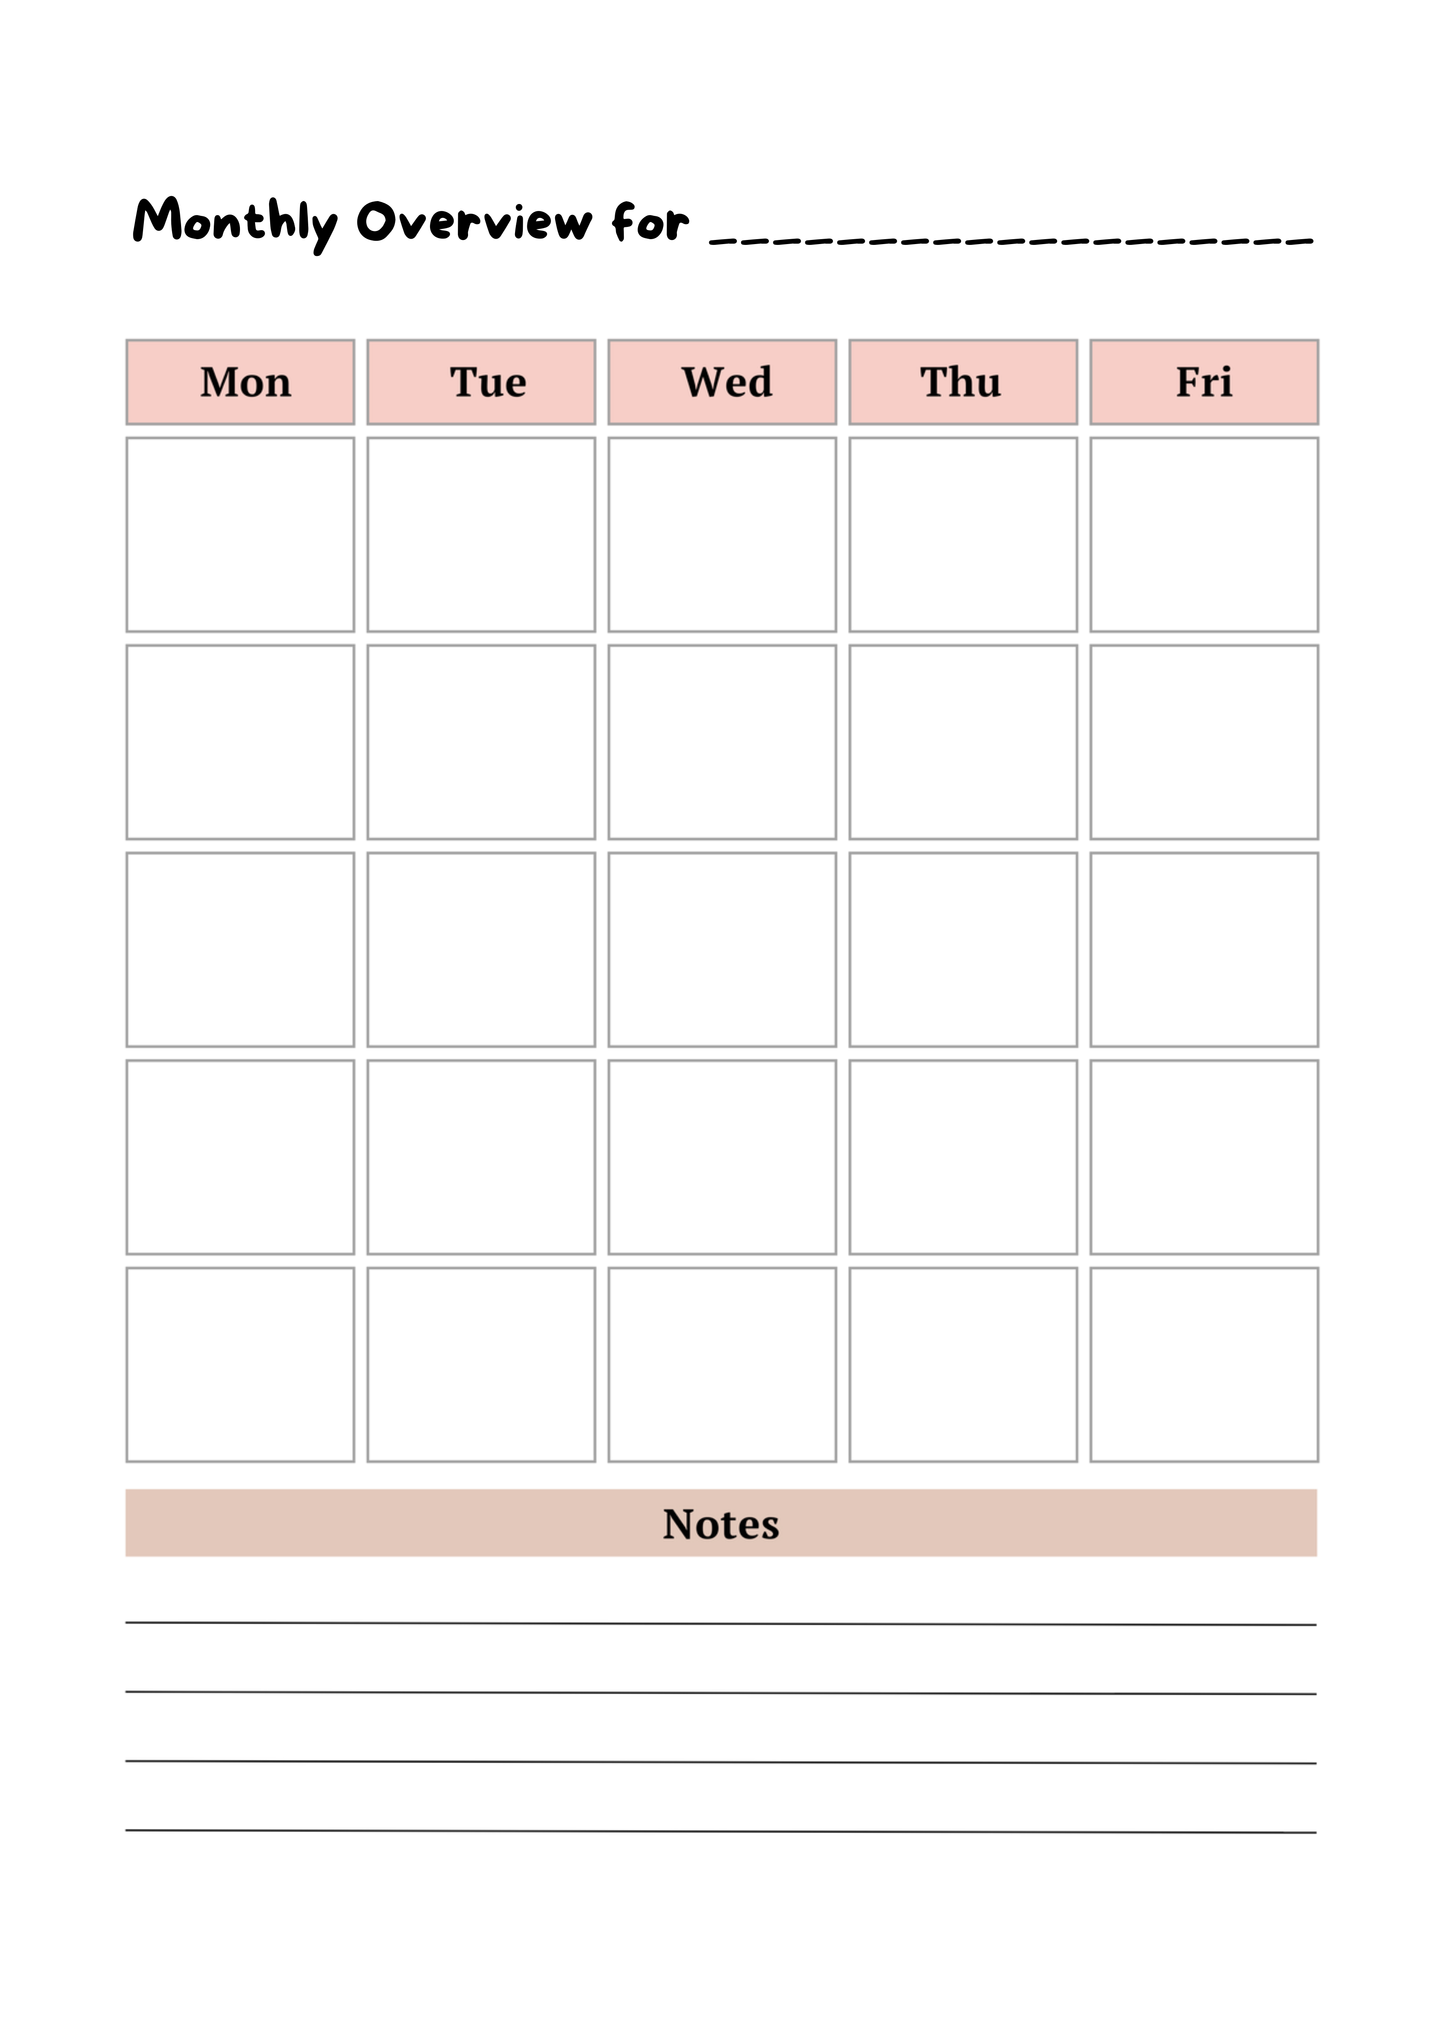 Yellow Flowers with Small Green Leaves Teacher Planner